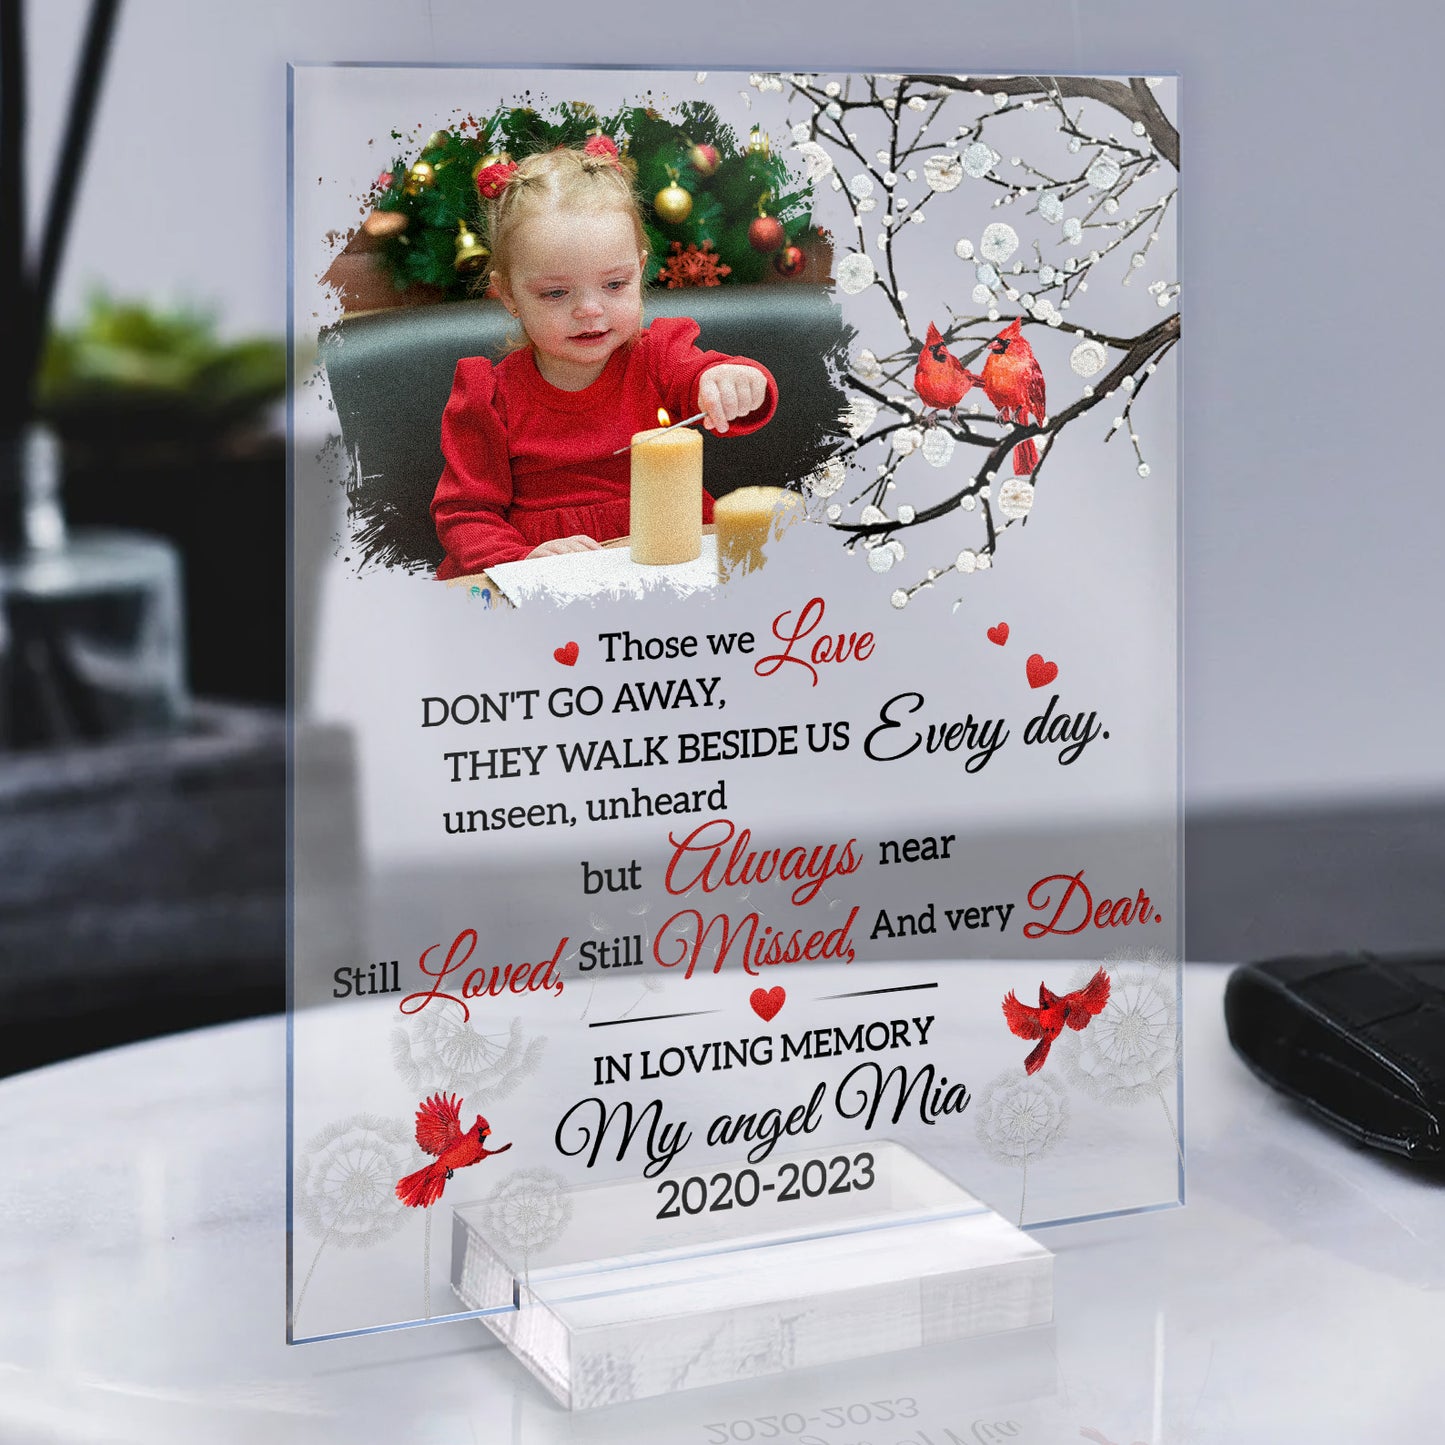 Those We Love Don't Go Away Memorial Gift - Personalized Acrylic Photo Plaque